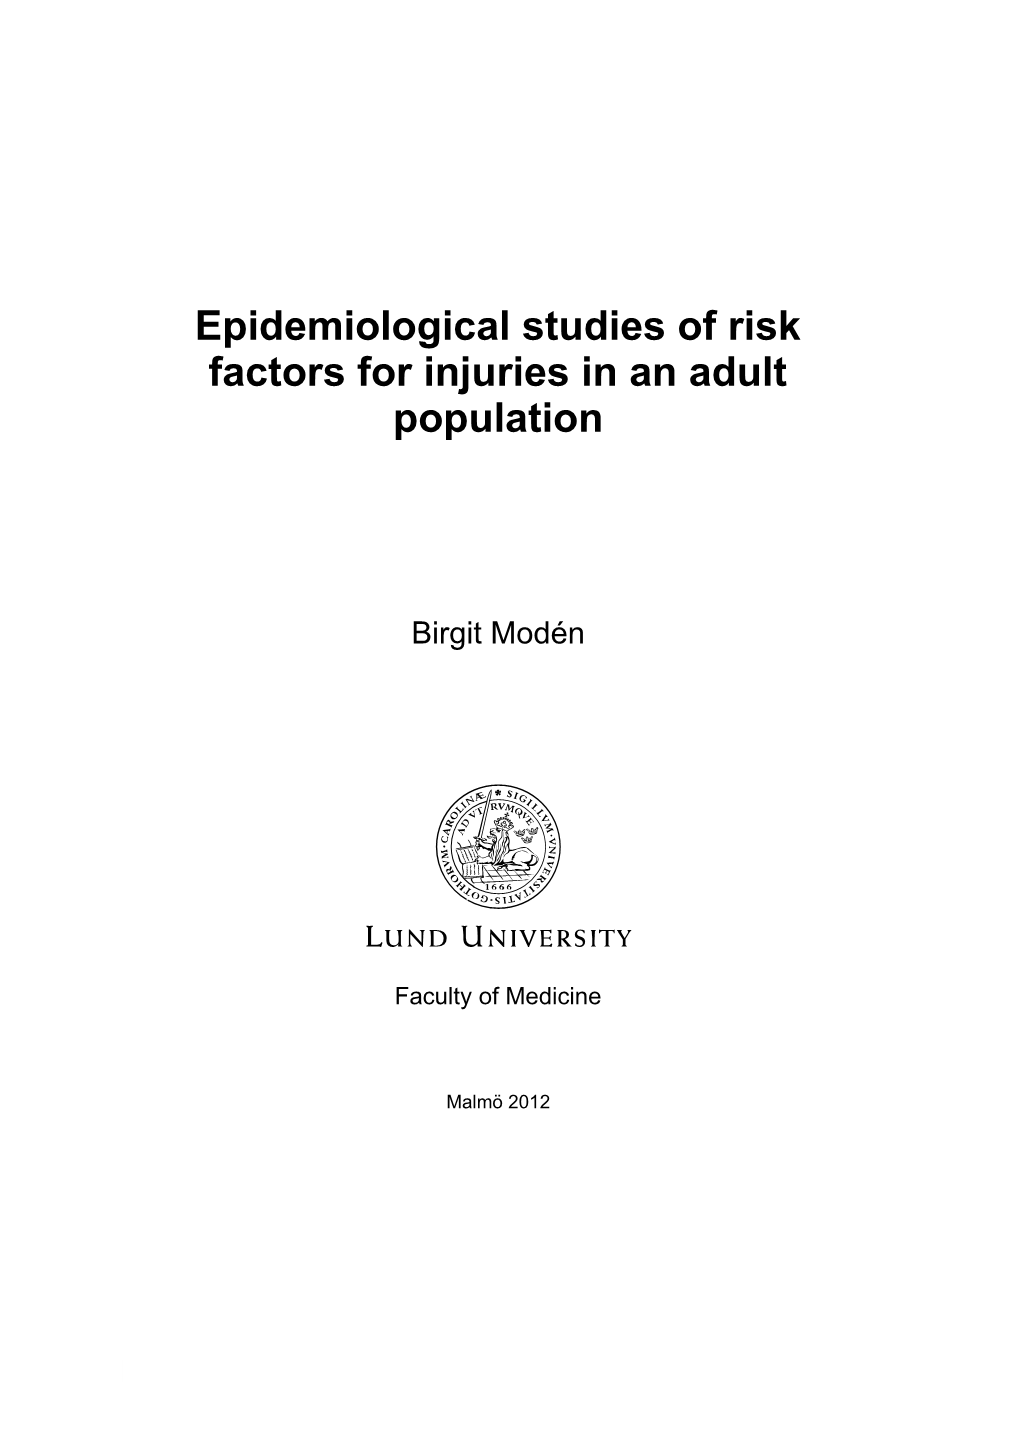 Epidemiological Studies of Risk Factors for Injuries in an Adult Population